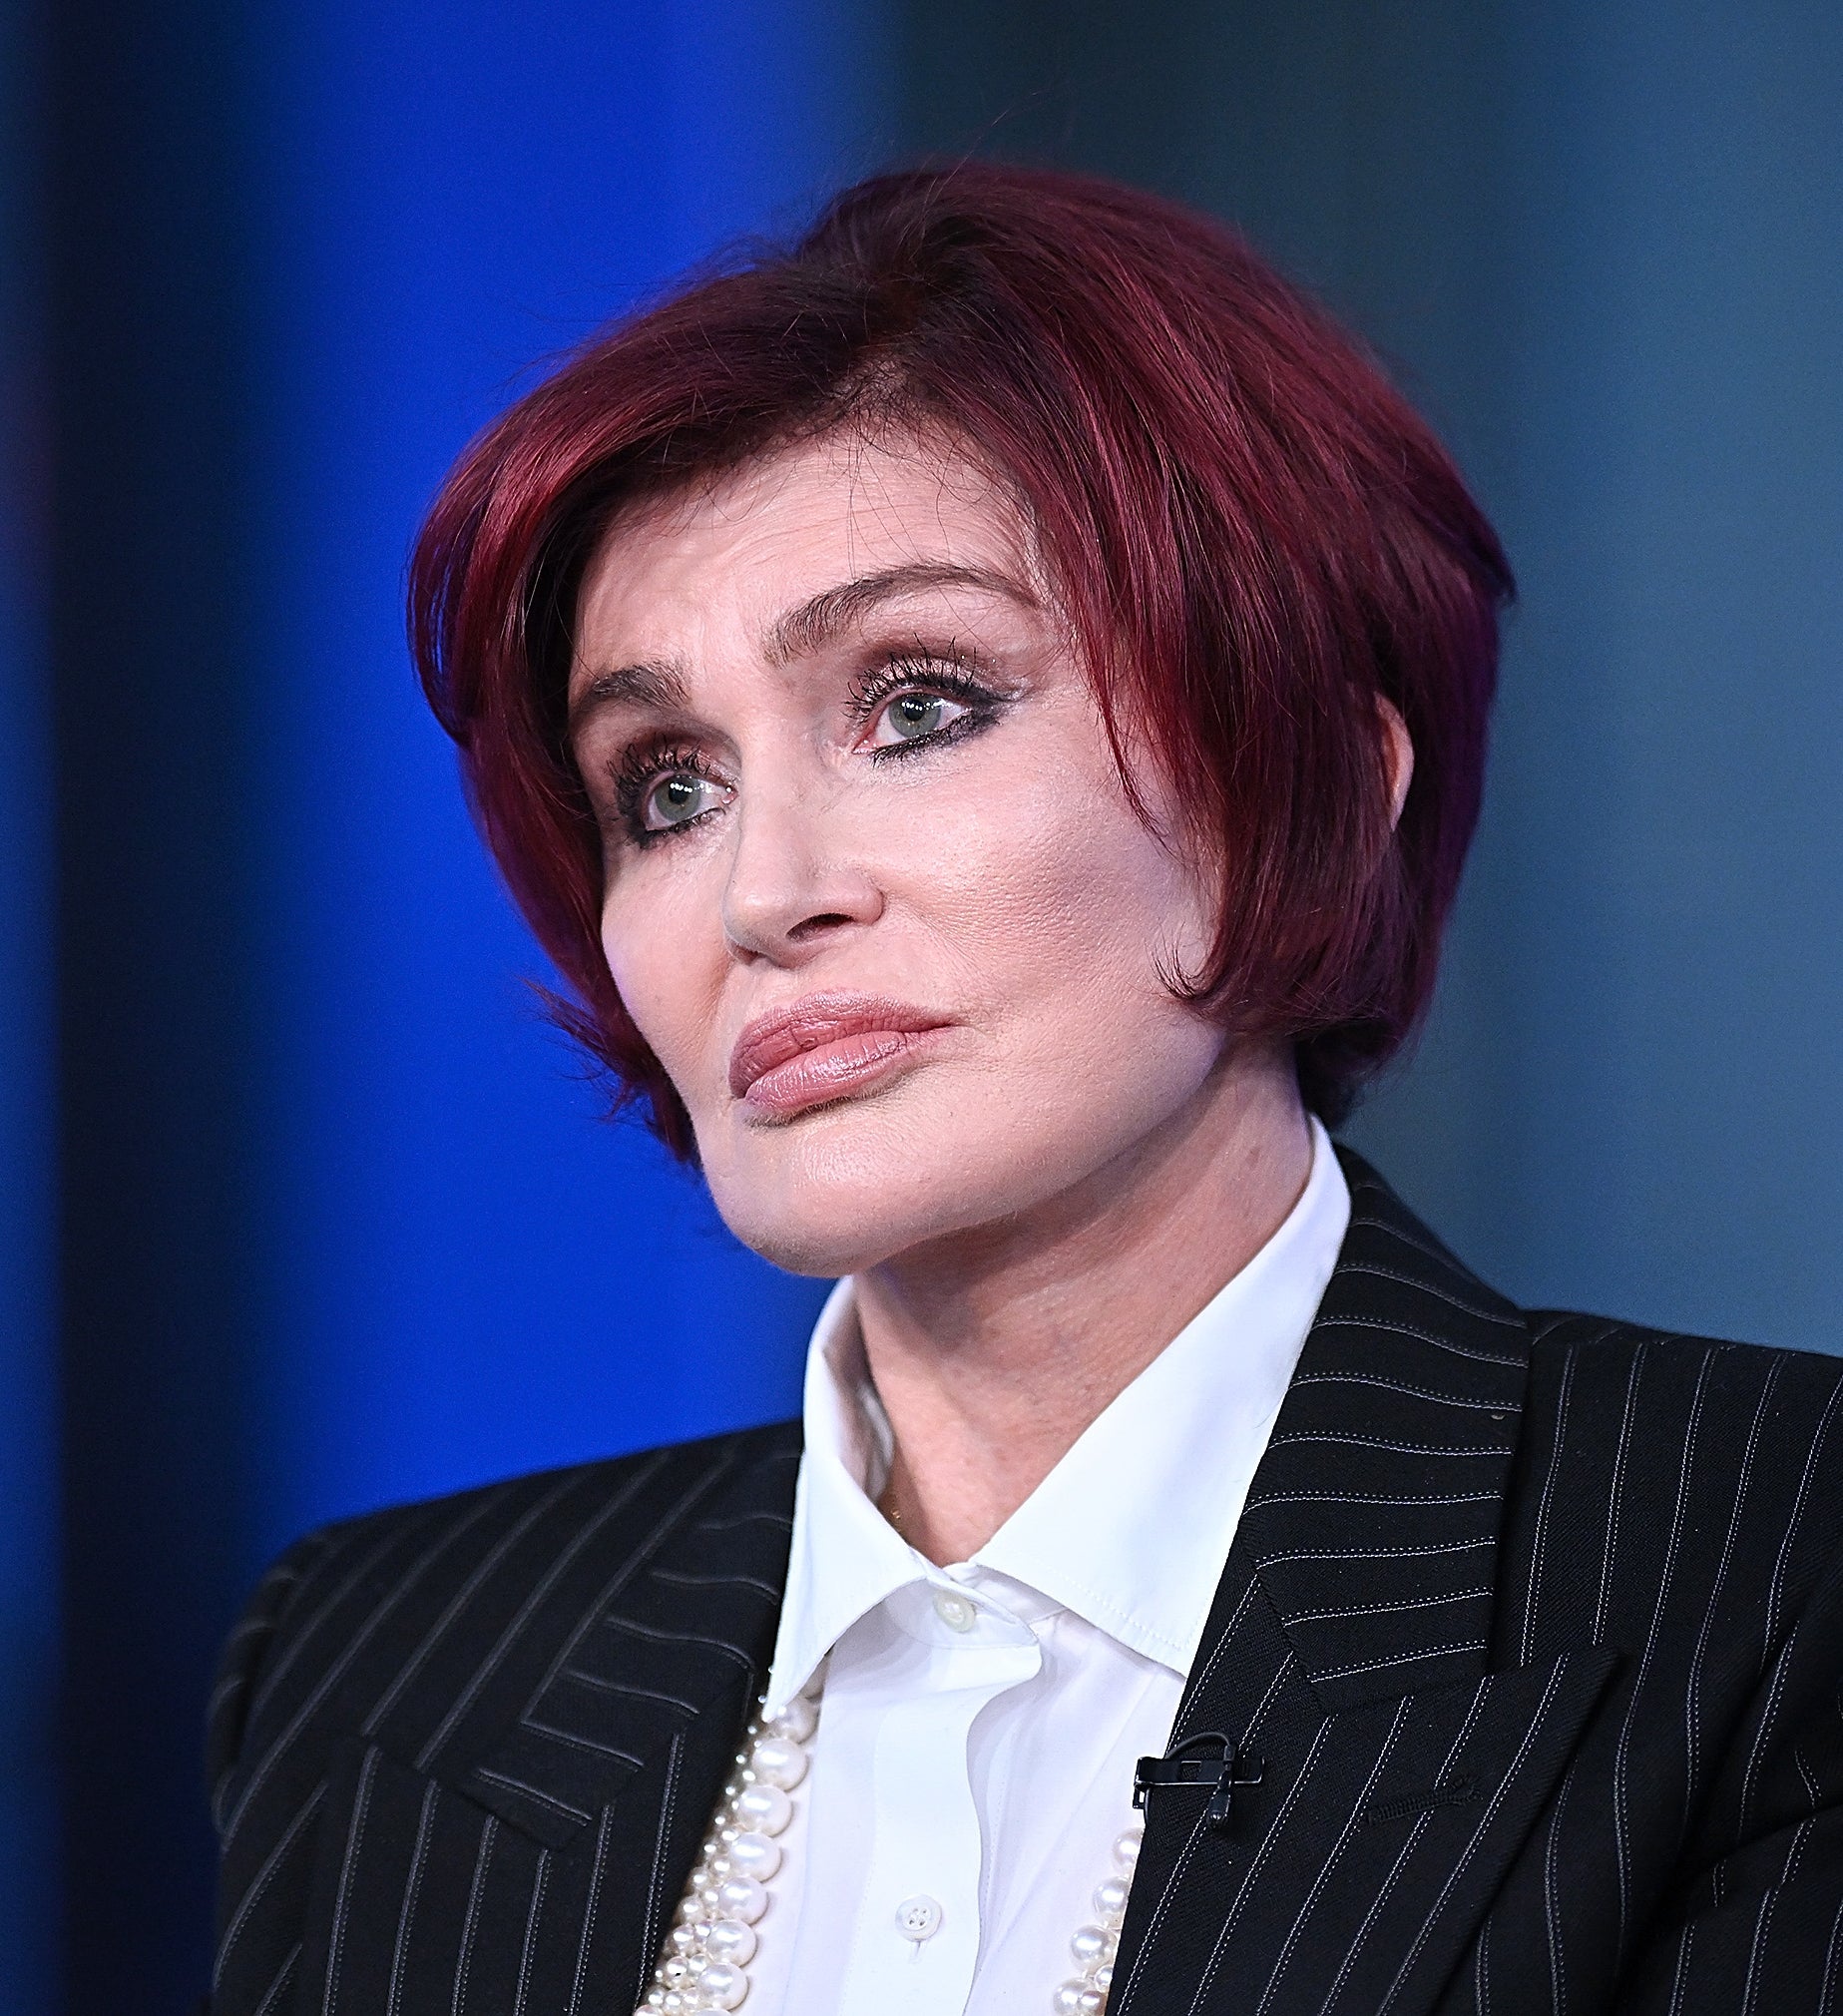 Sharon Osbourne in a pinstripe suit with layered pearls